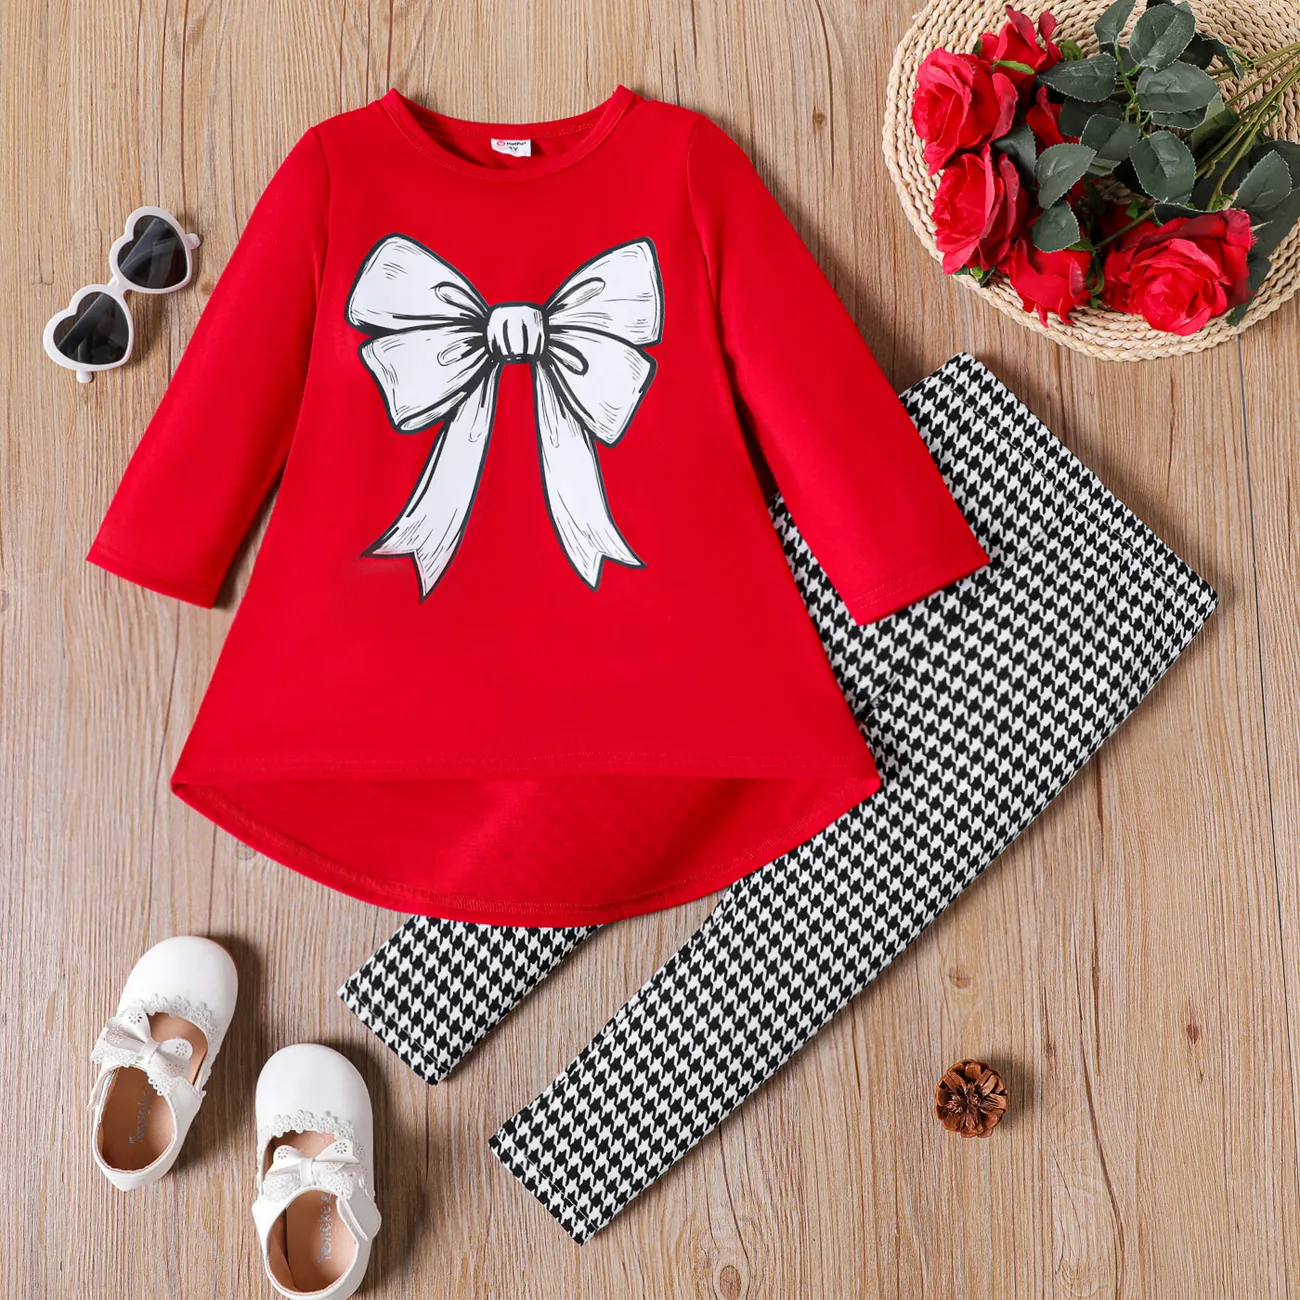 2pcs Toddler Girl Bowknot Print High Low Long-sleeve Tee and Houndstooth Leggings Set Red-2 big image 1